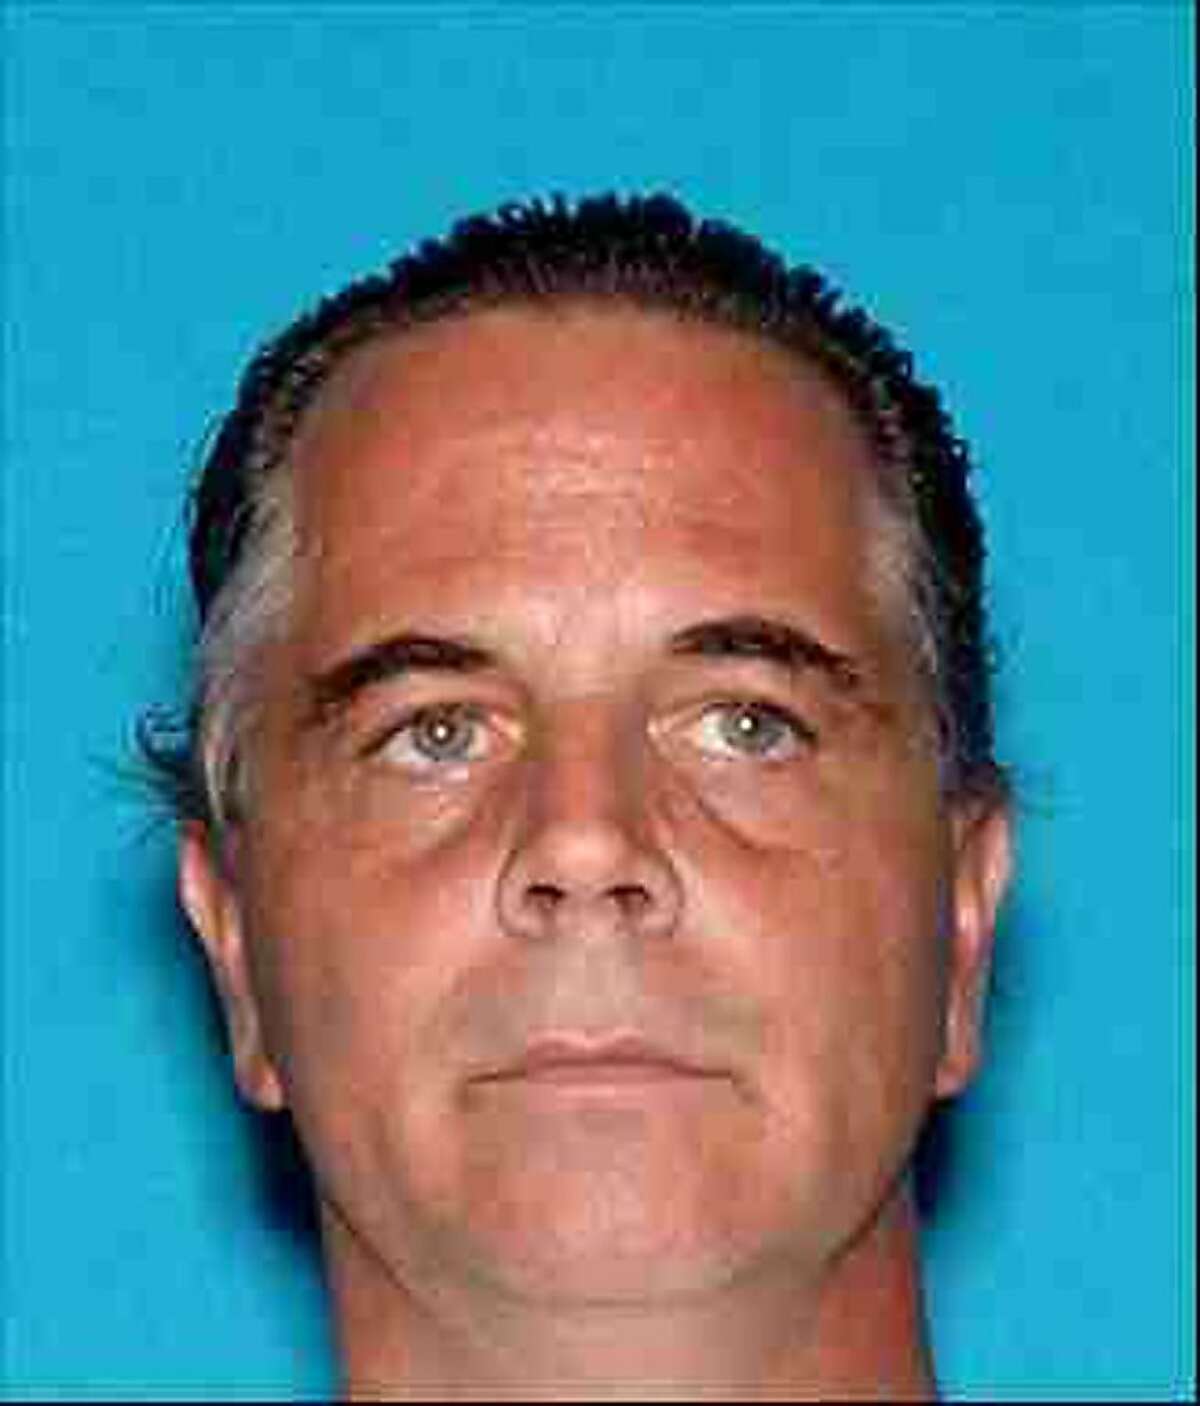 This image provided by the Siskiyou County Sheriff's office shows David Dean Johnson, who is suspected of stealing more than $1 million in gold from the Siskiyou County's historic collection early last year. Officials say Johnson and Scott Wayne Bailey broke into the gold collection at the Siskiyou County Courthouse in Yreka in February 2012 and made off with $1,257,500 in gold, jewelry and artifacts. (AP Photo/Siskiyou County Sheriff)